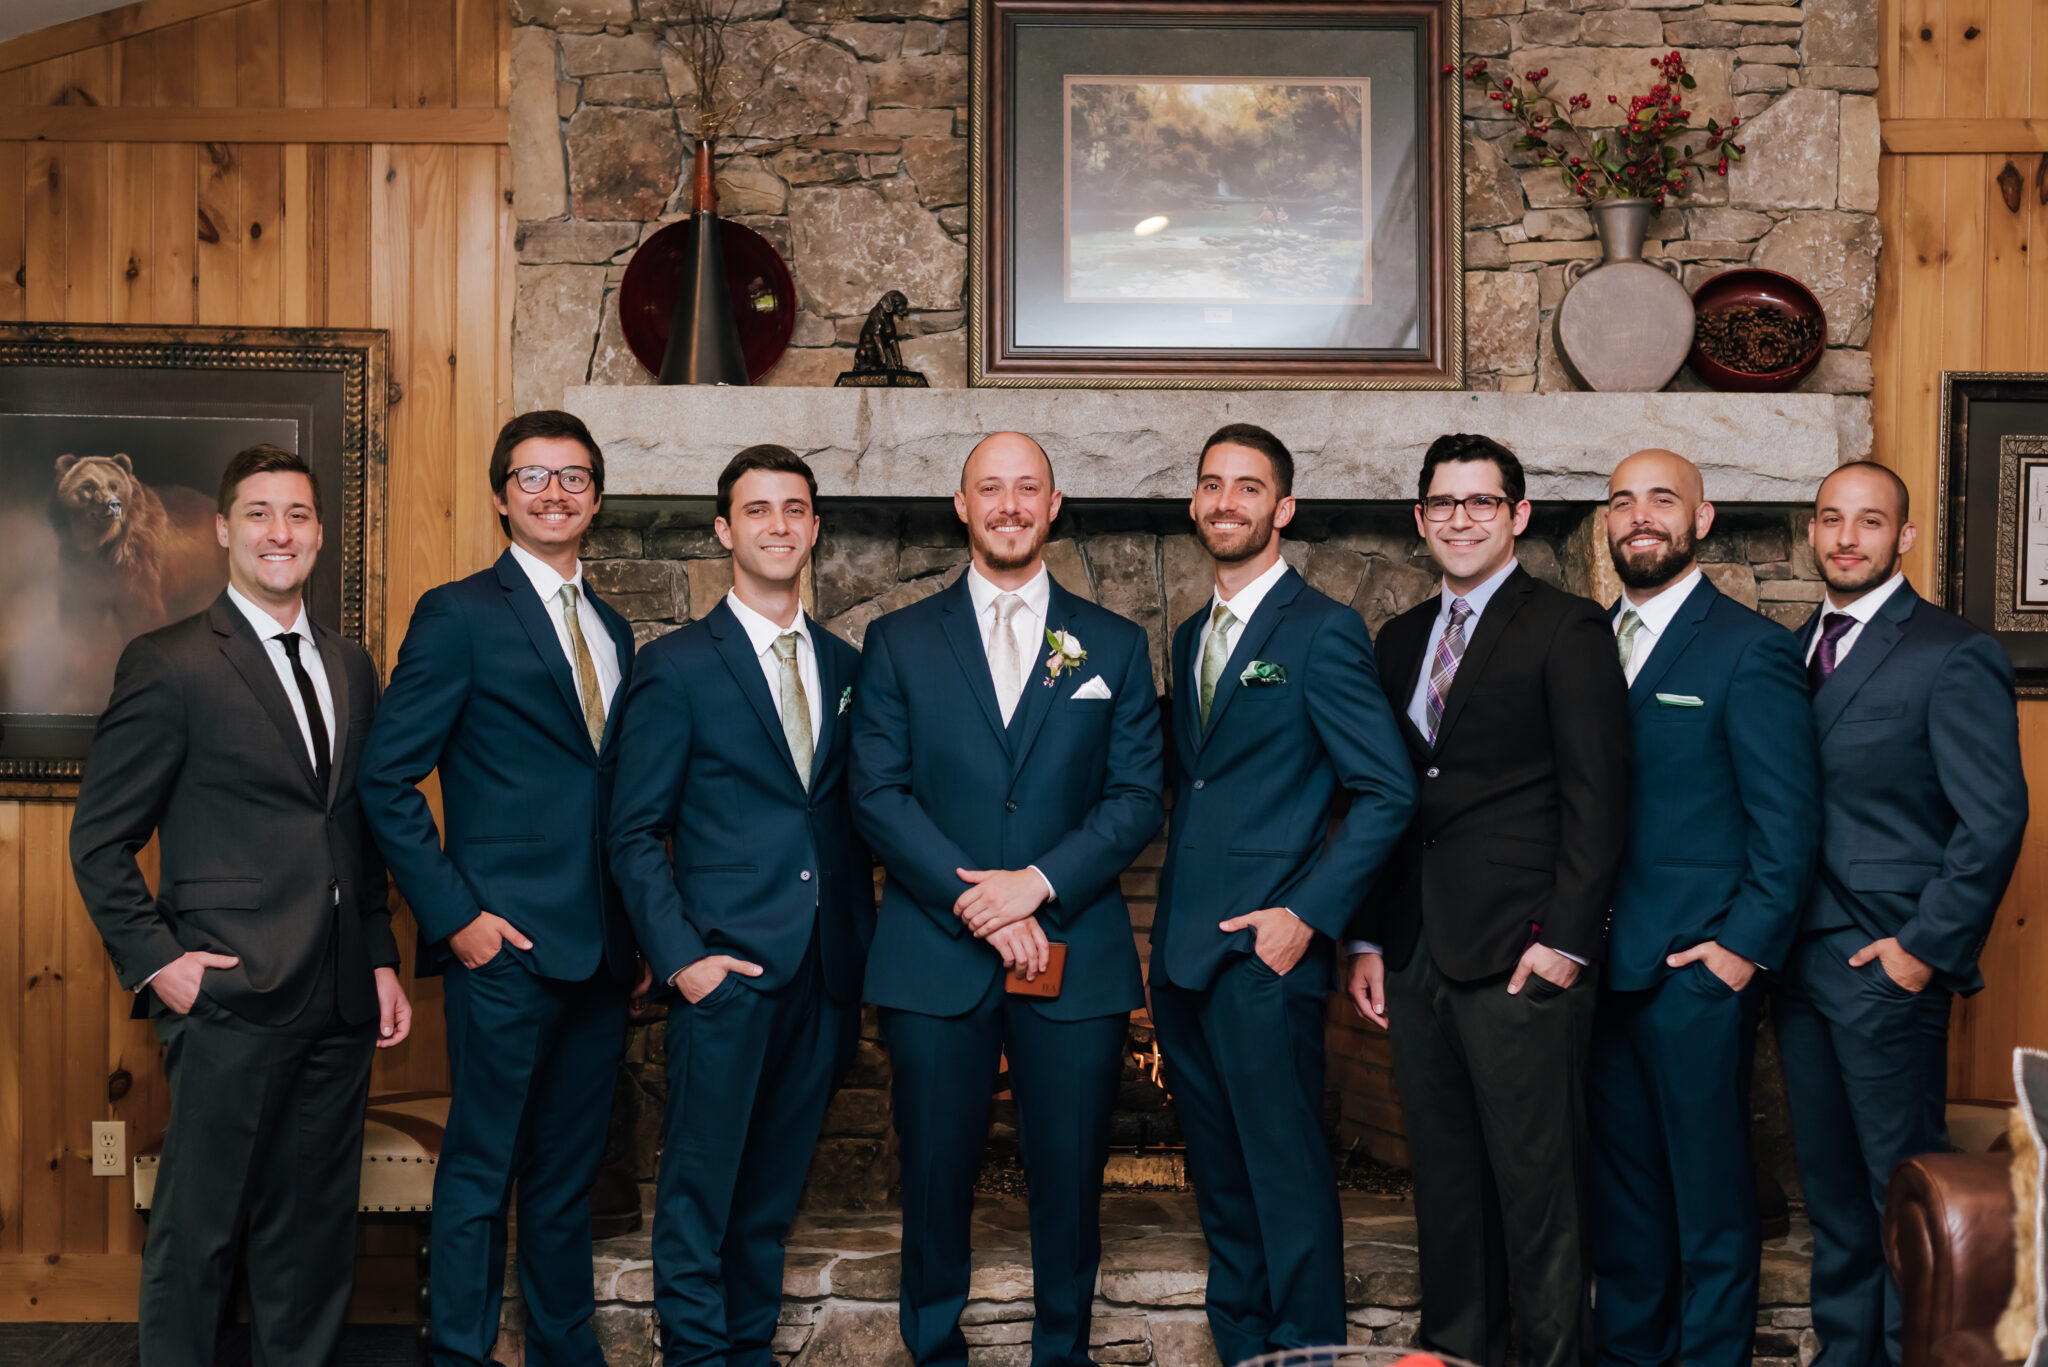 Groomsmen pose in front of rustic fireplace